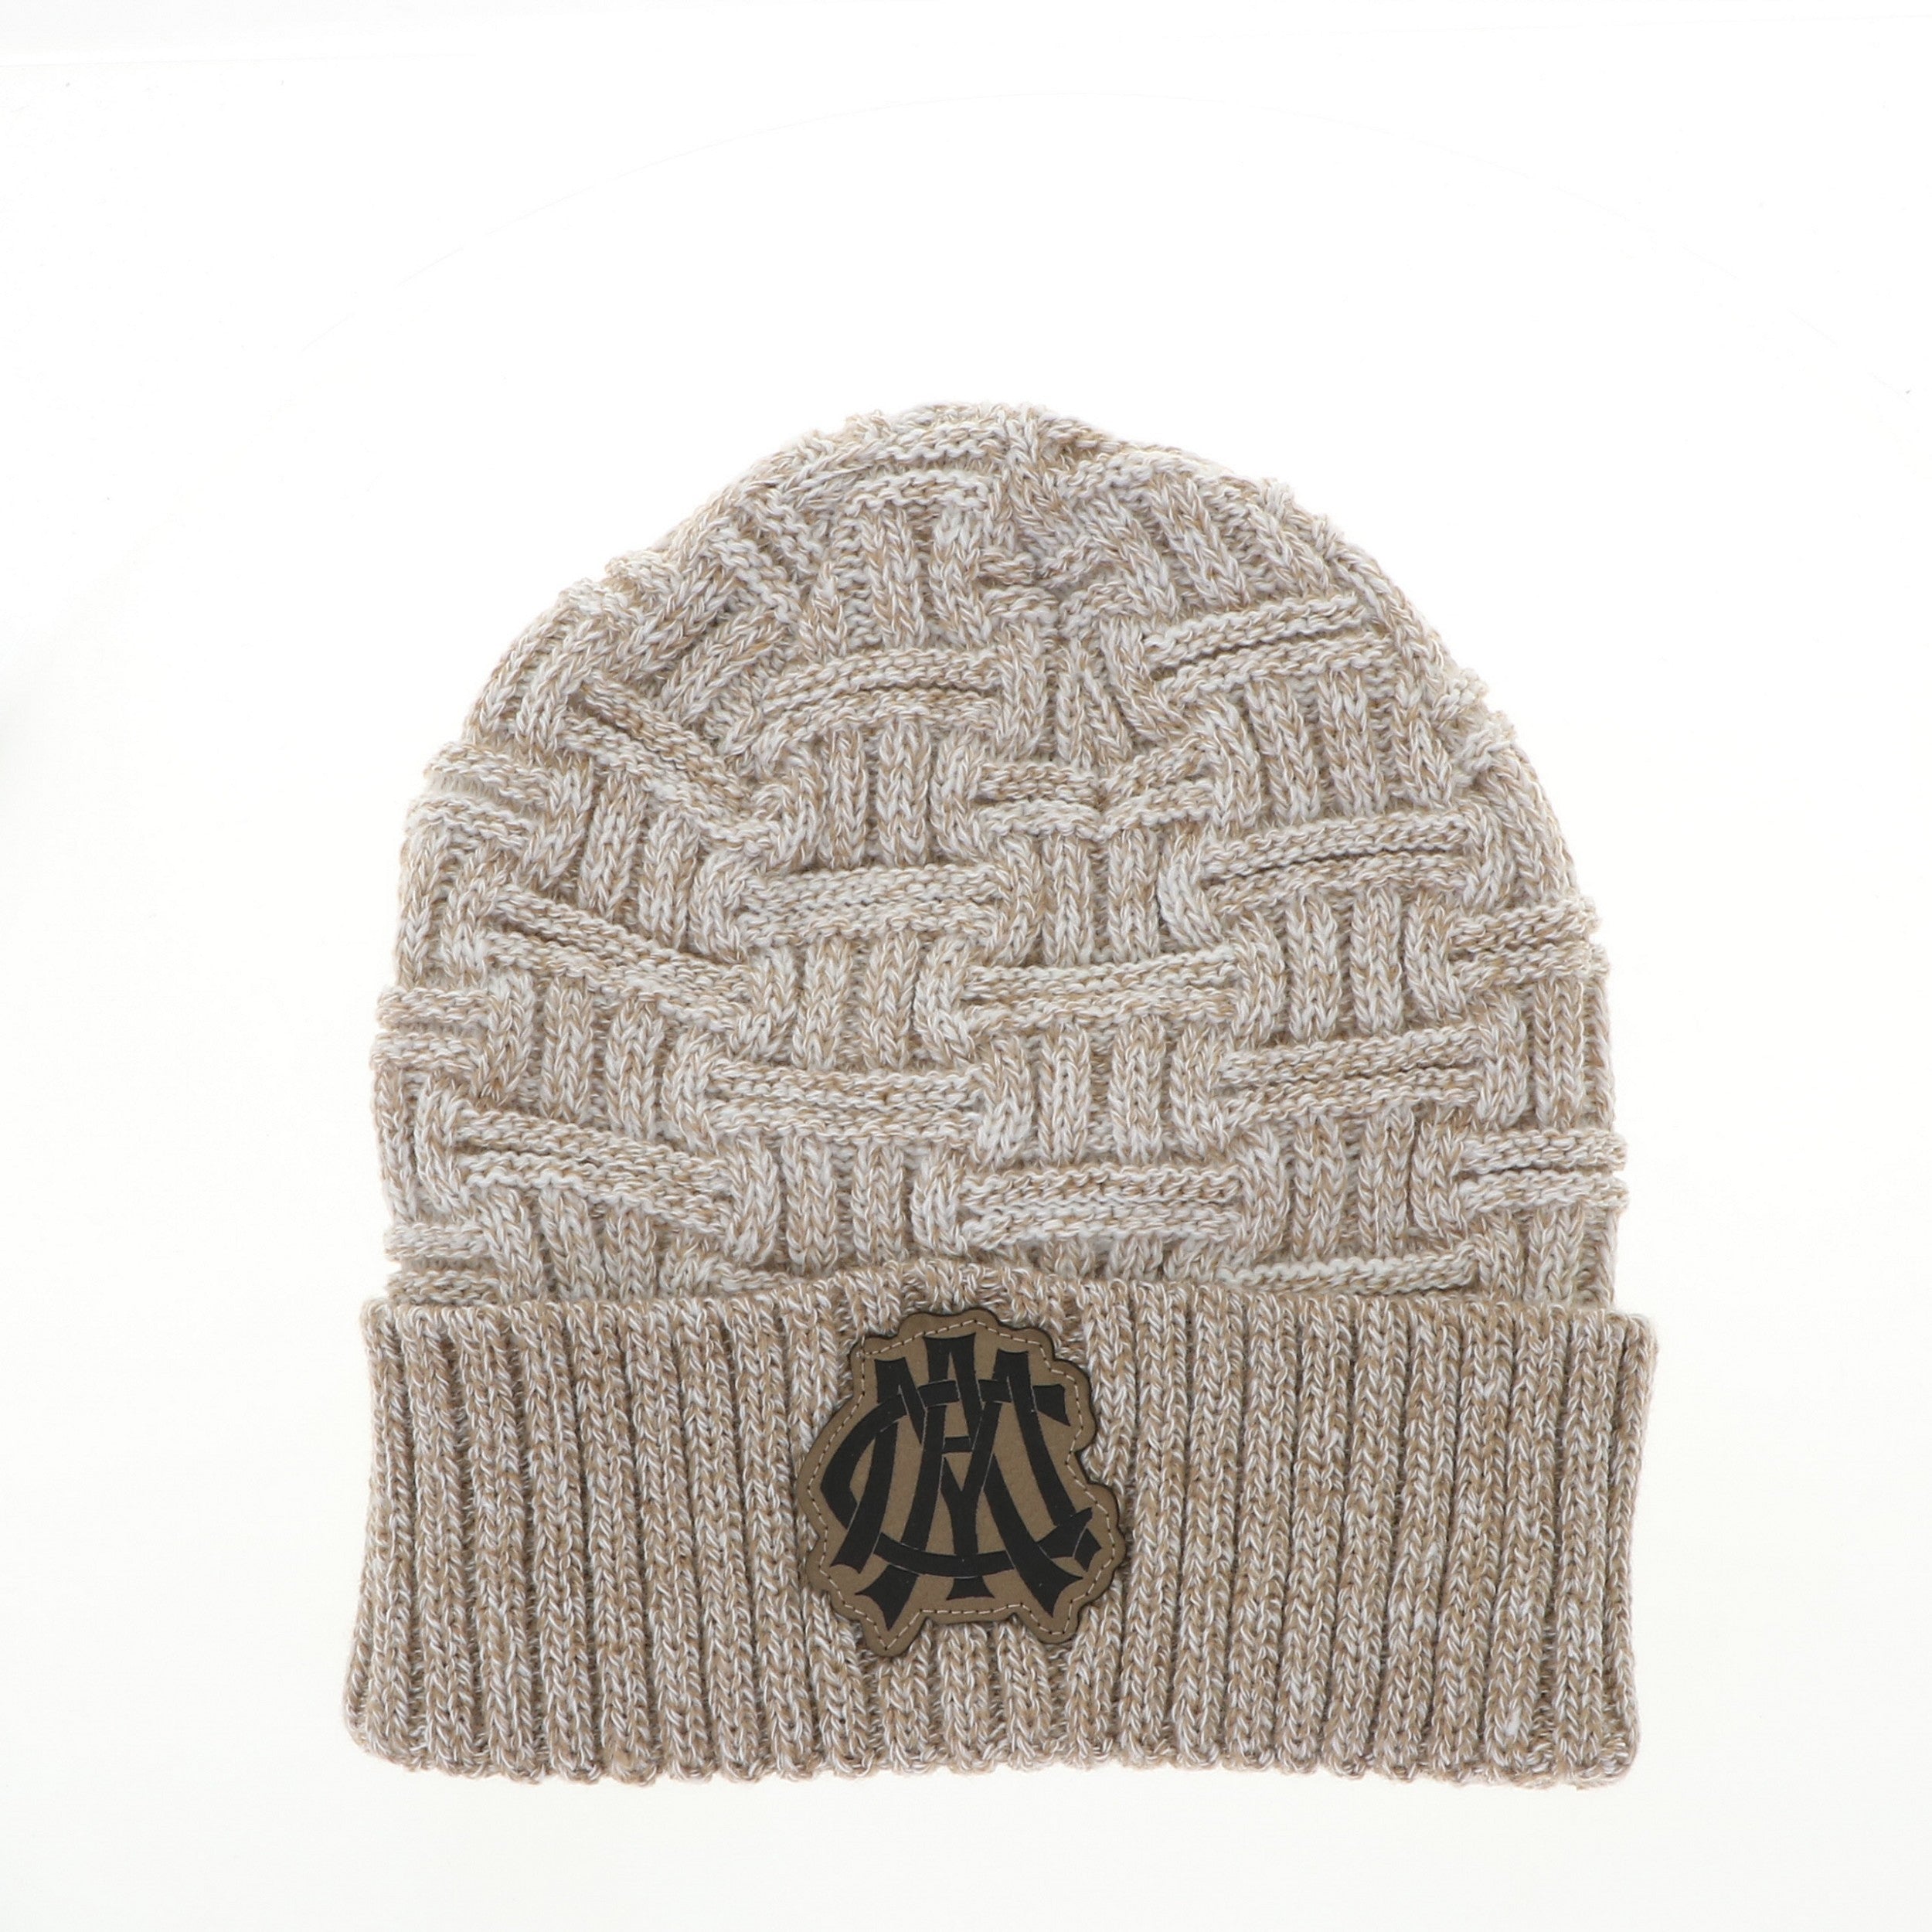 All Trails Cuff Beanie - Natural/Leather Patch CMA